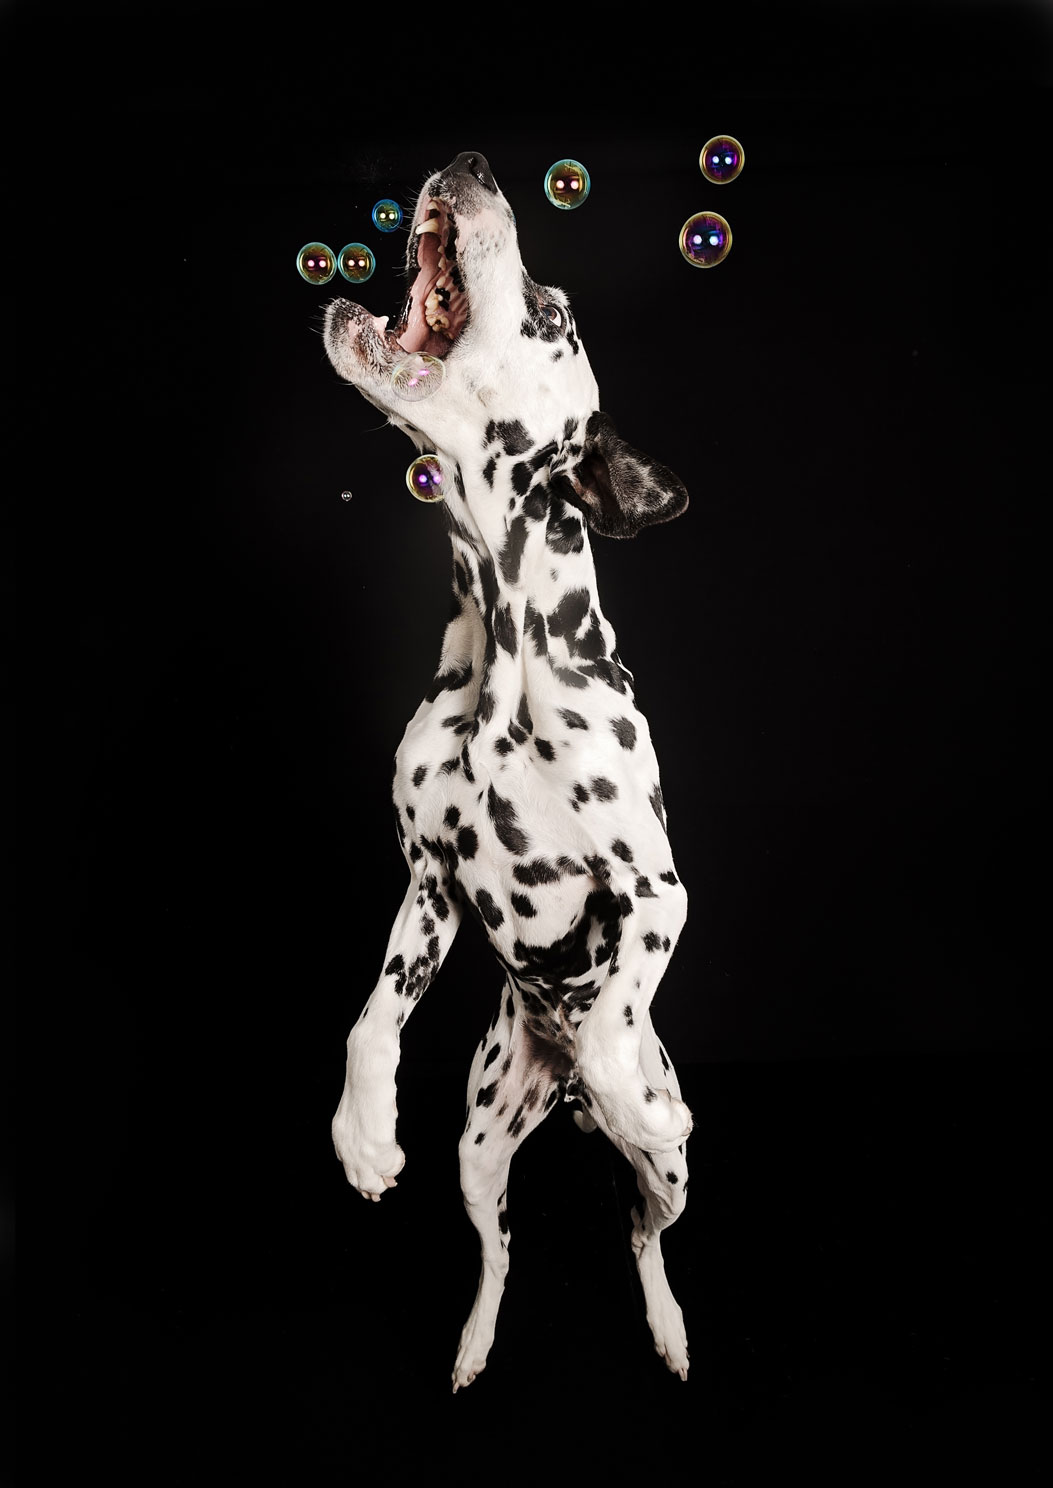 Bubbles Blowing bubbles are a great way of adding some fun into a photo session. Some dogs just ignore them, but you get a few that love to chase all the bobbles around the studio.